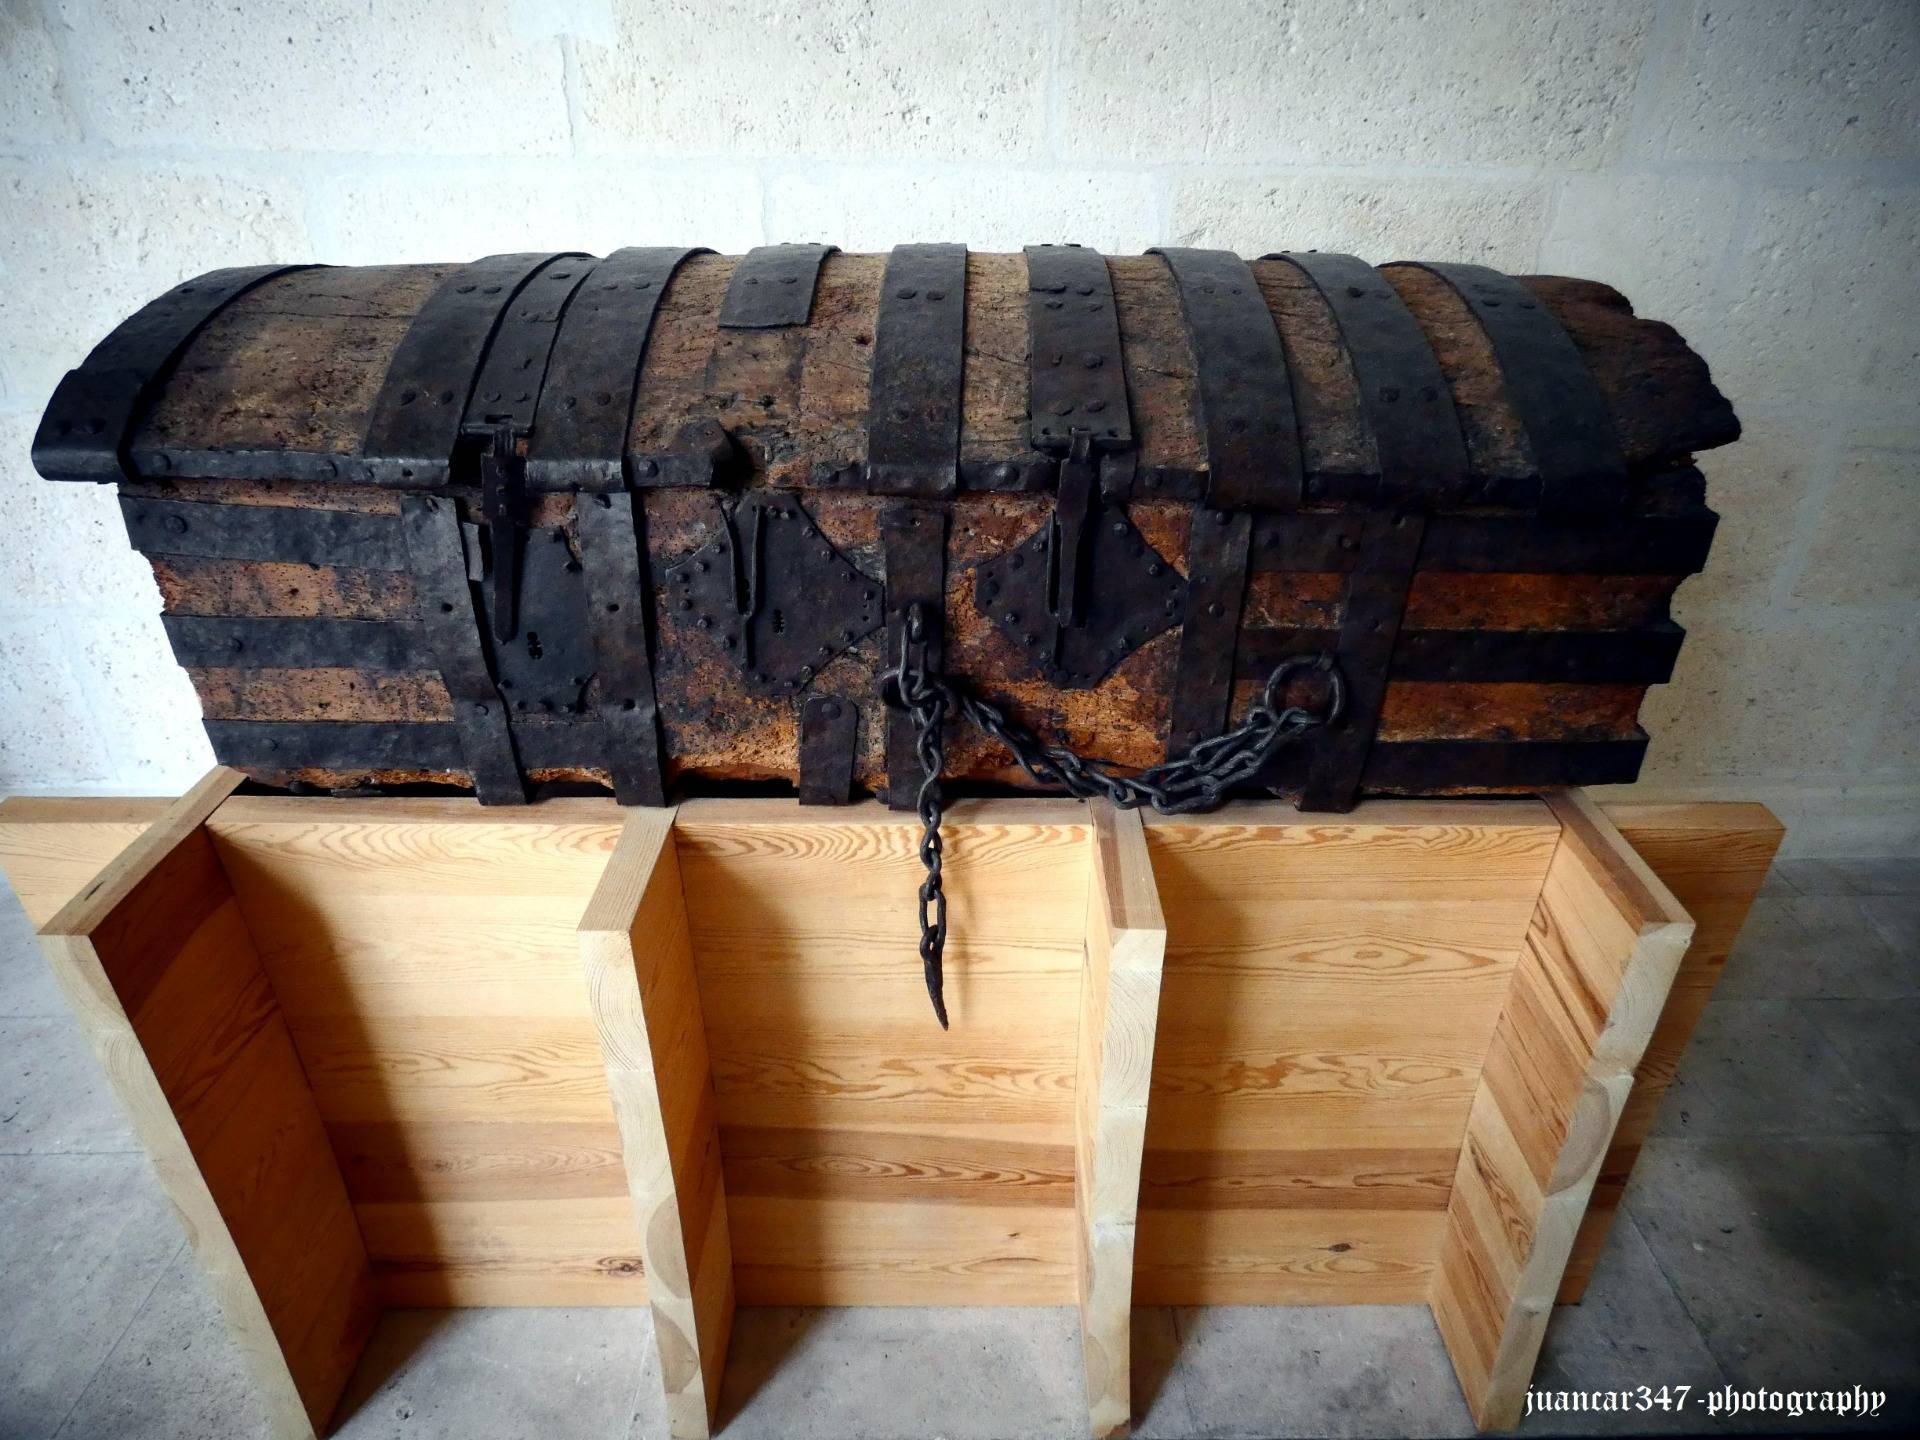 The famous chest of the Cid Campeador